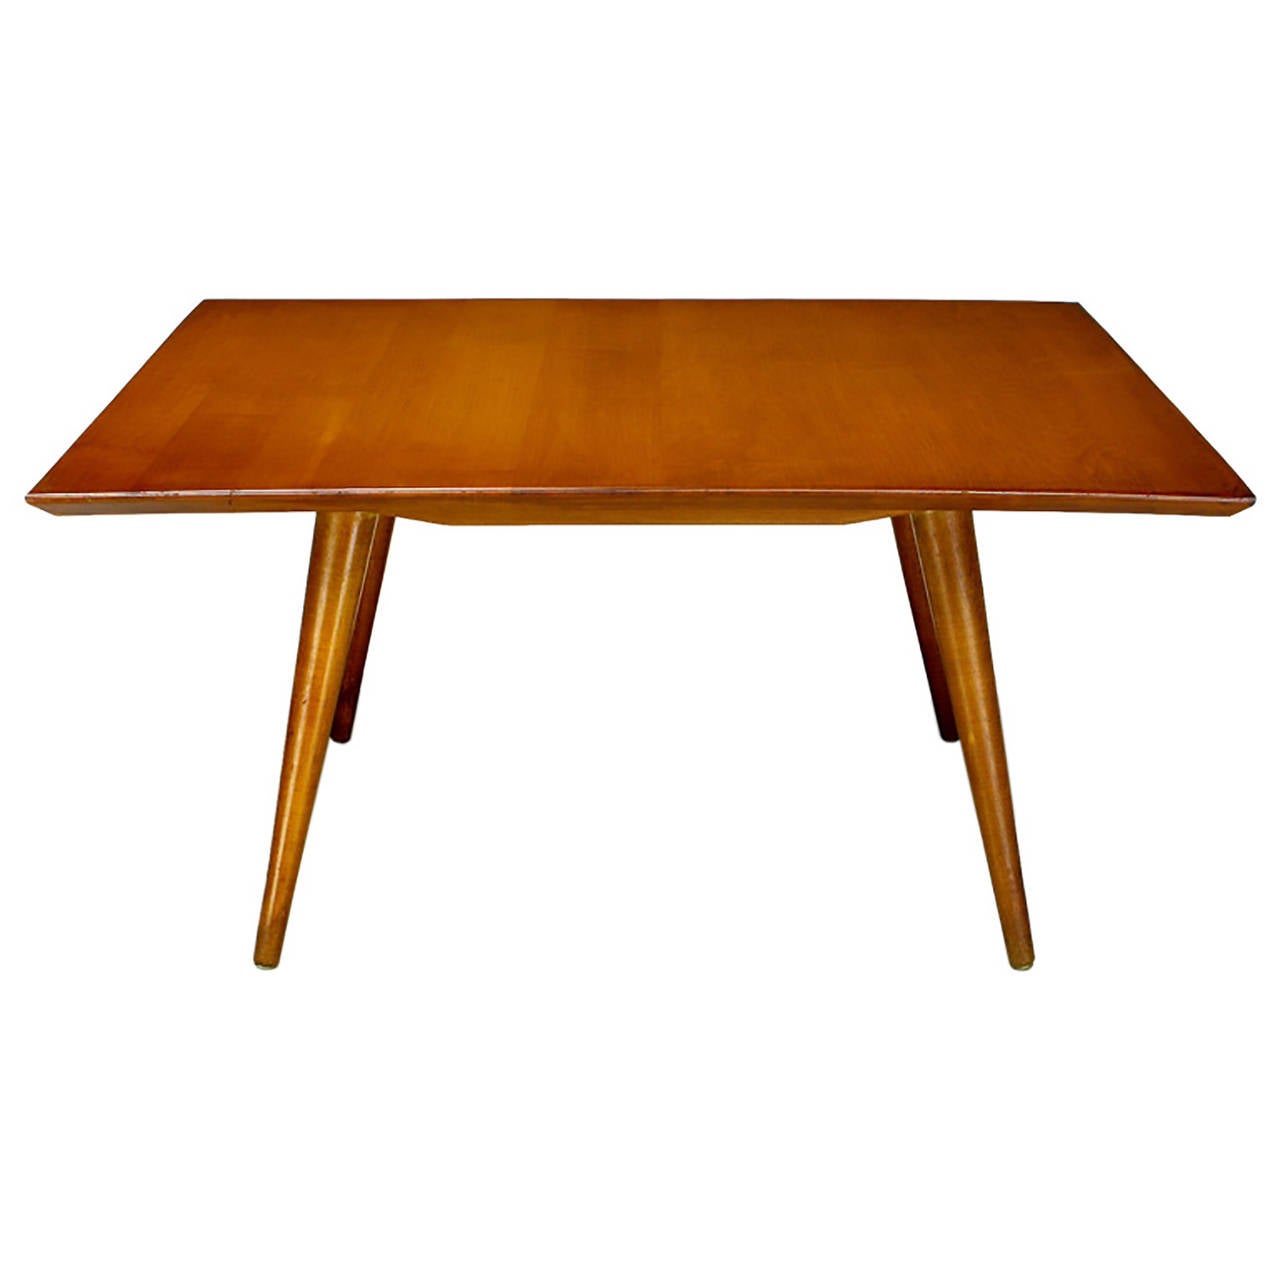 Clean-lined coffee table by Paul McCobb for Winchendon. Solid rock maple top with four conical legs.